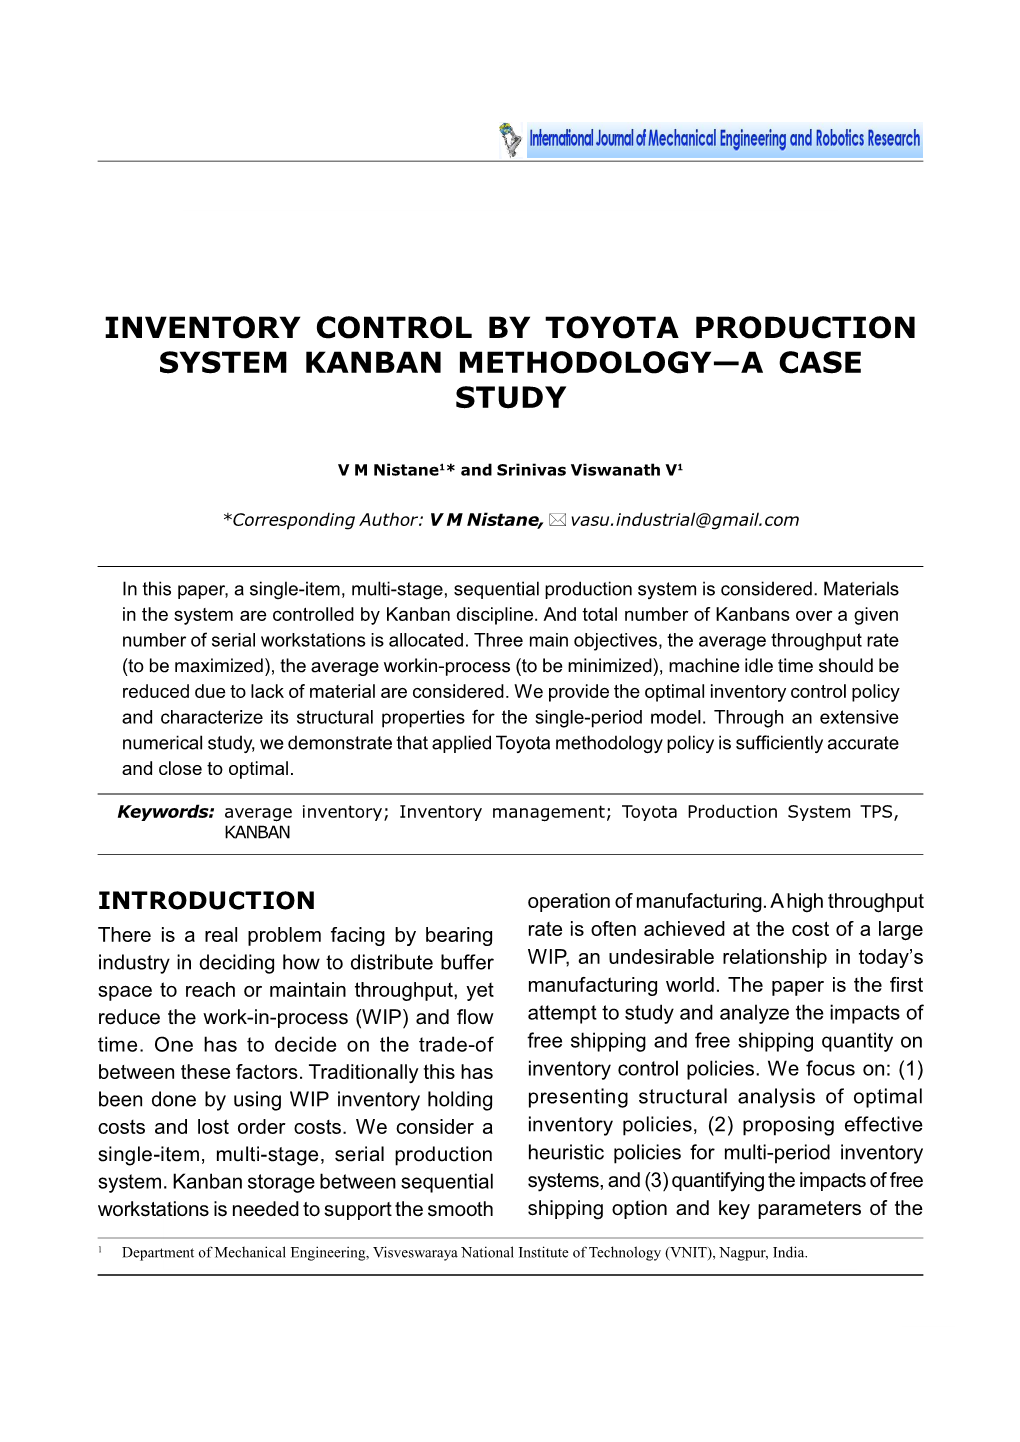 Inventory Control by Toyota Production System Kanban Methodology—A Case Study